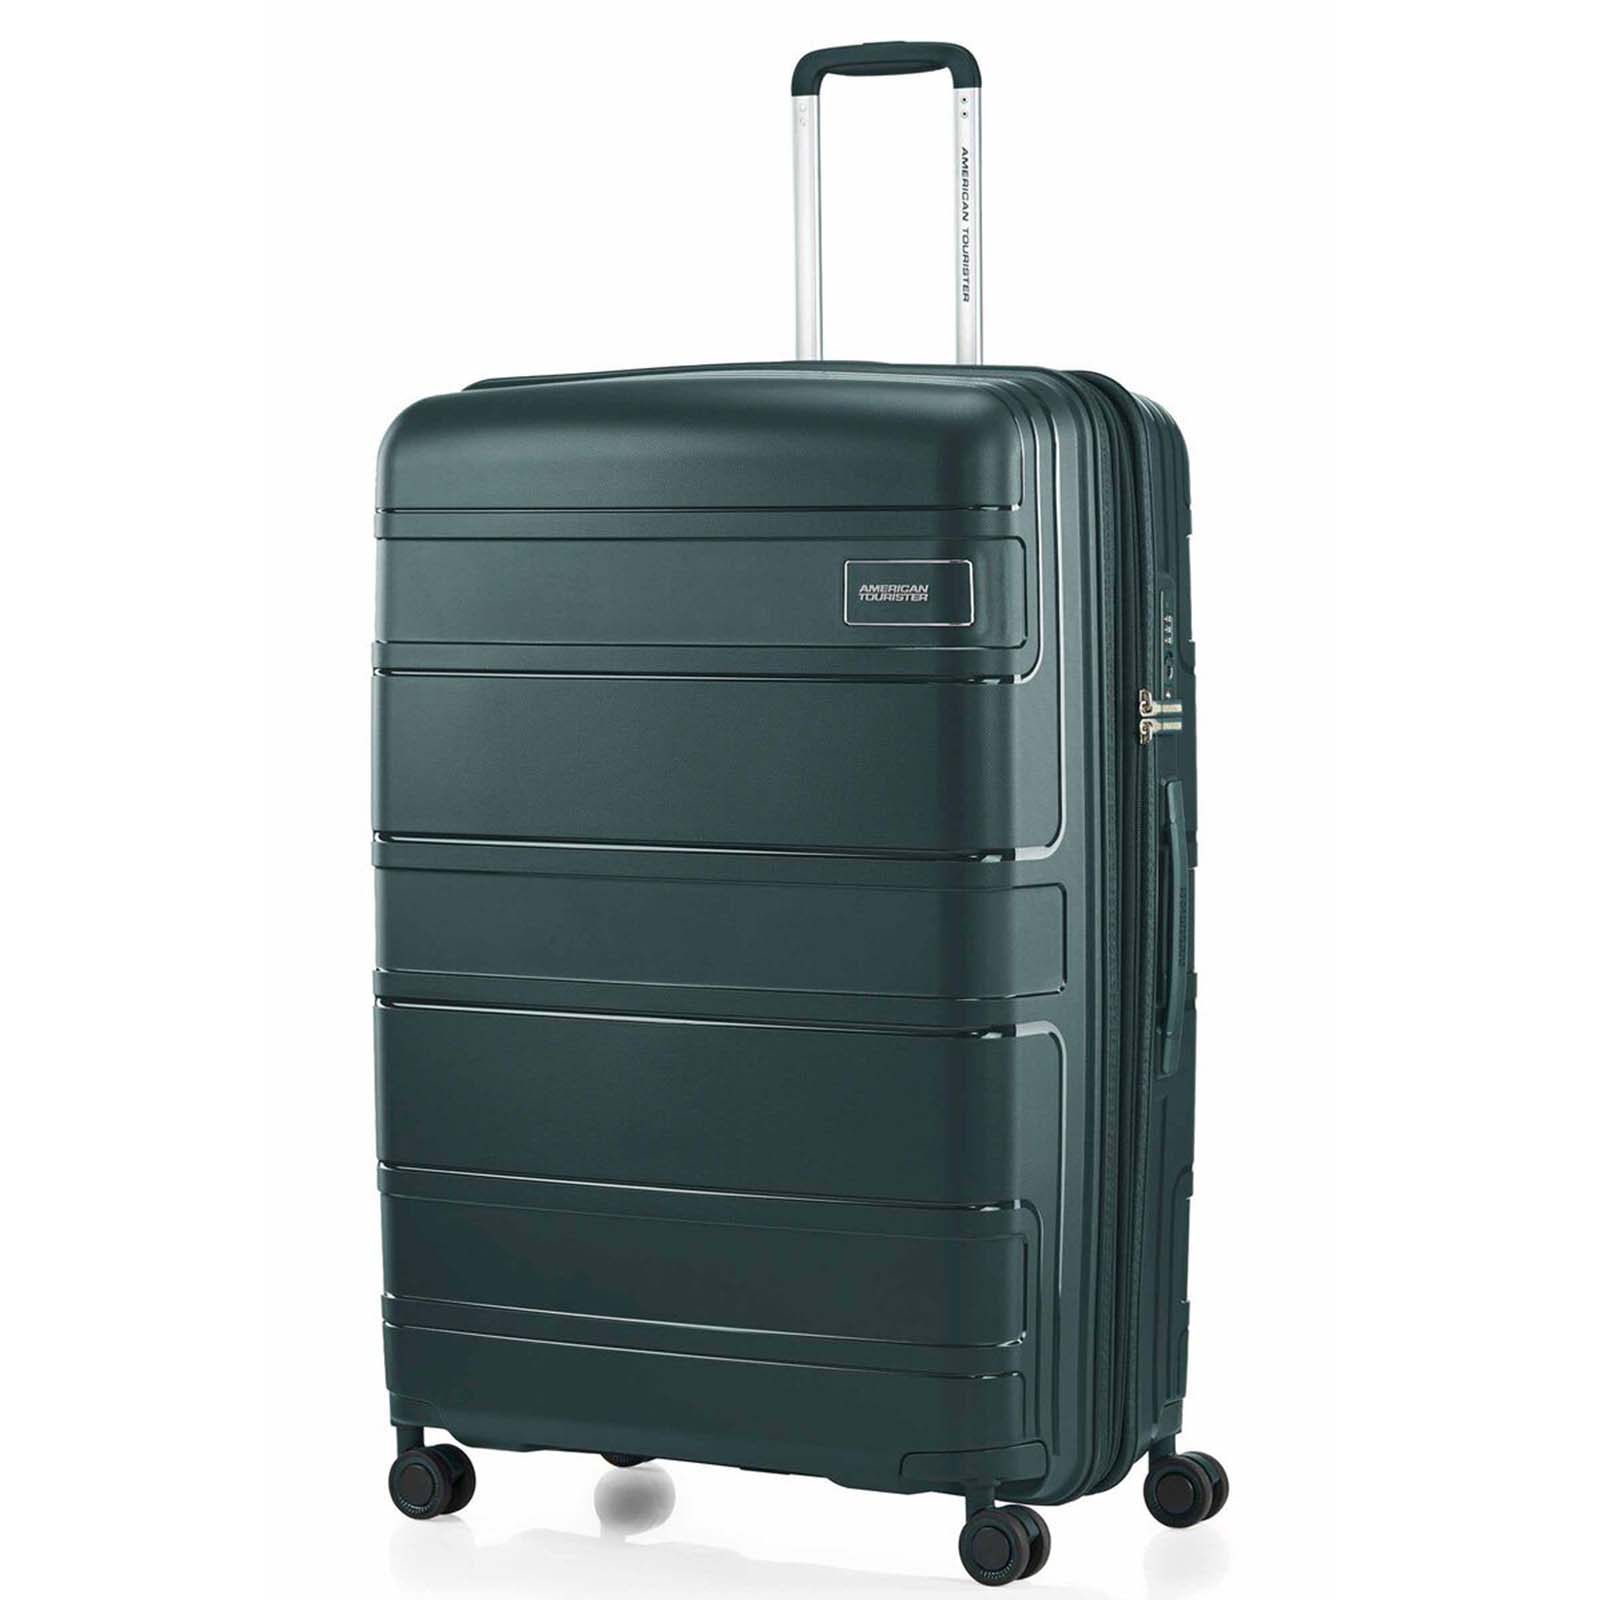 American-Tourister-Light-Max-82cm-Suitcase-Varsity-Green-Front-Angle